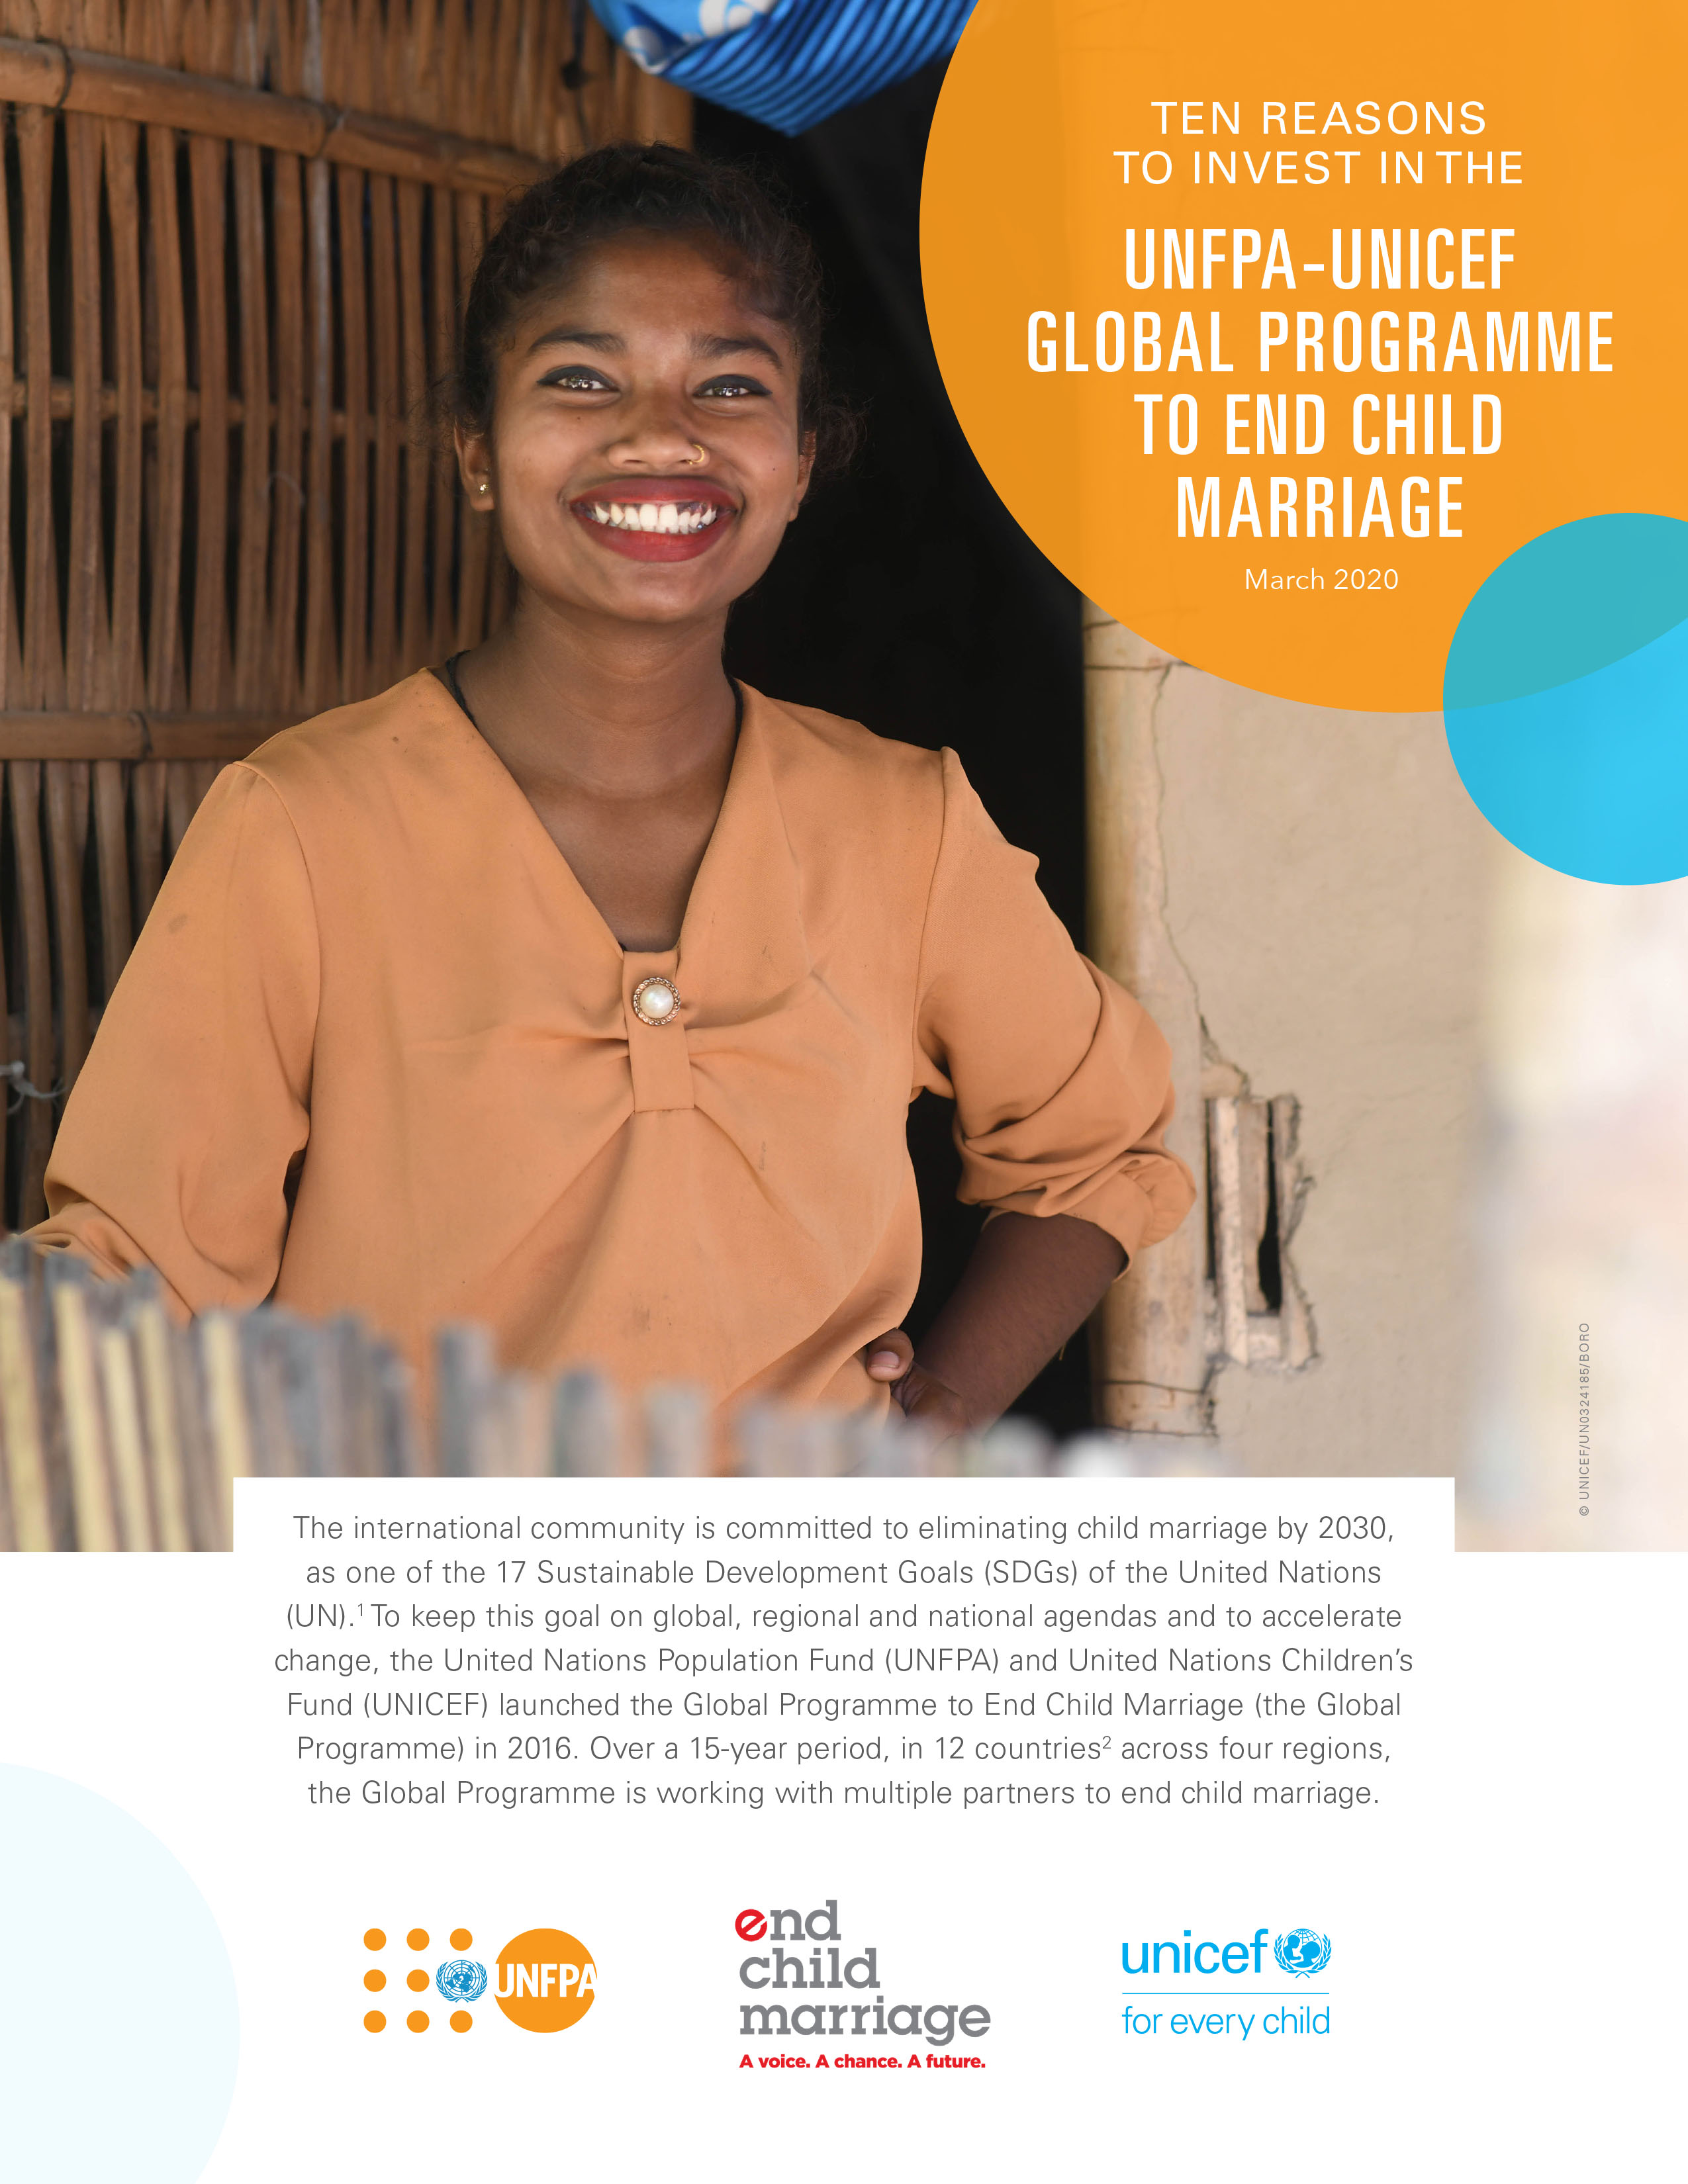 Ten reasons to invest in the UNFPA-UNICEF Global Programme to End Child Marriage